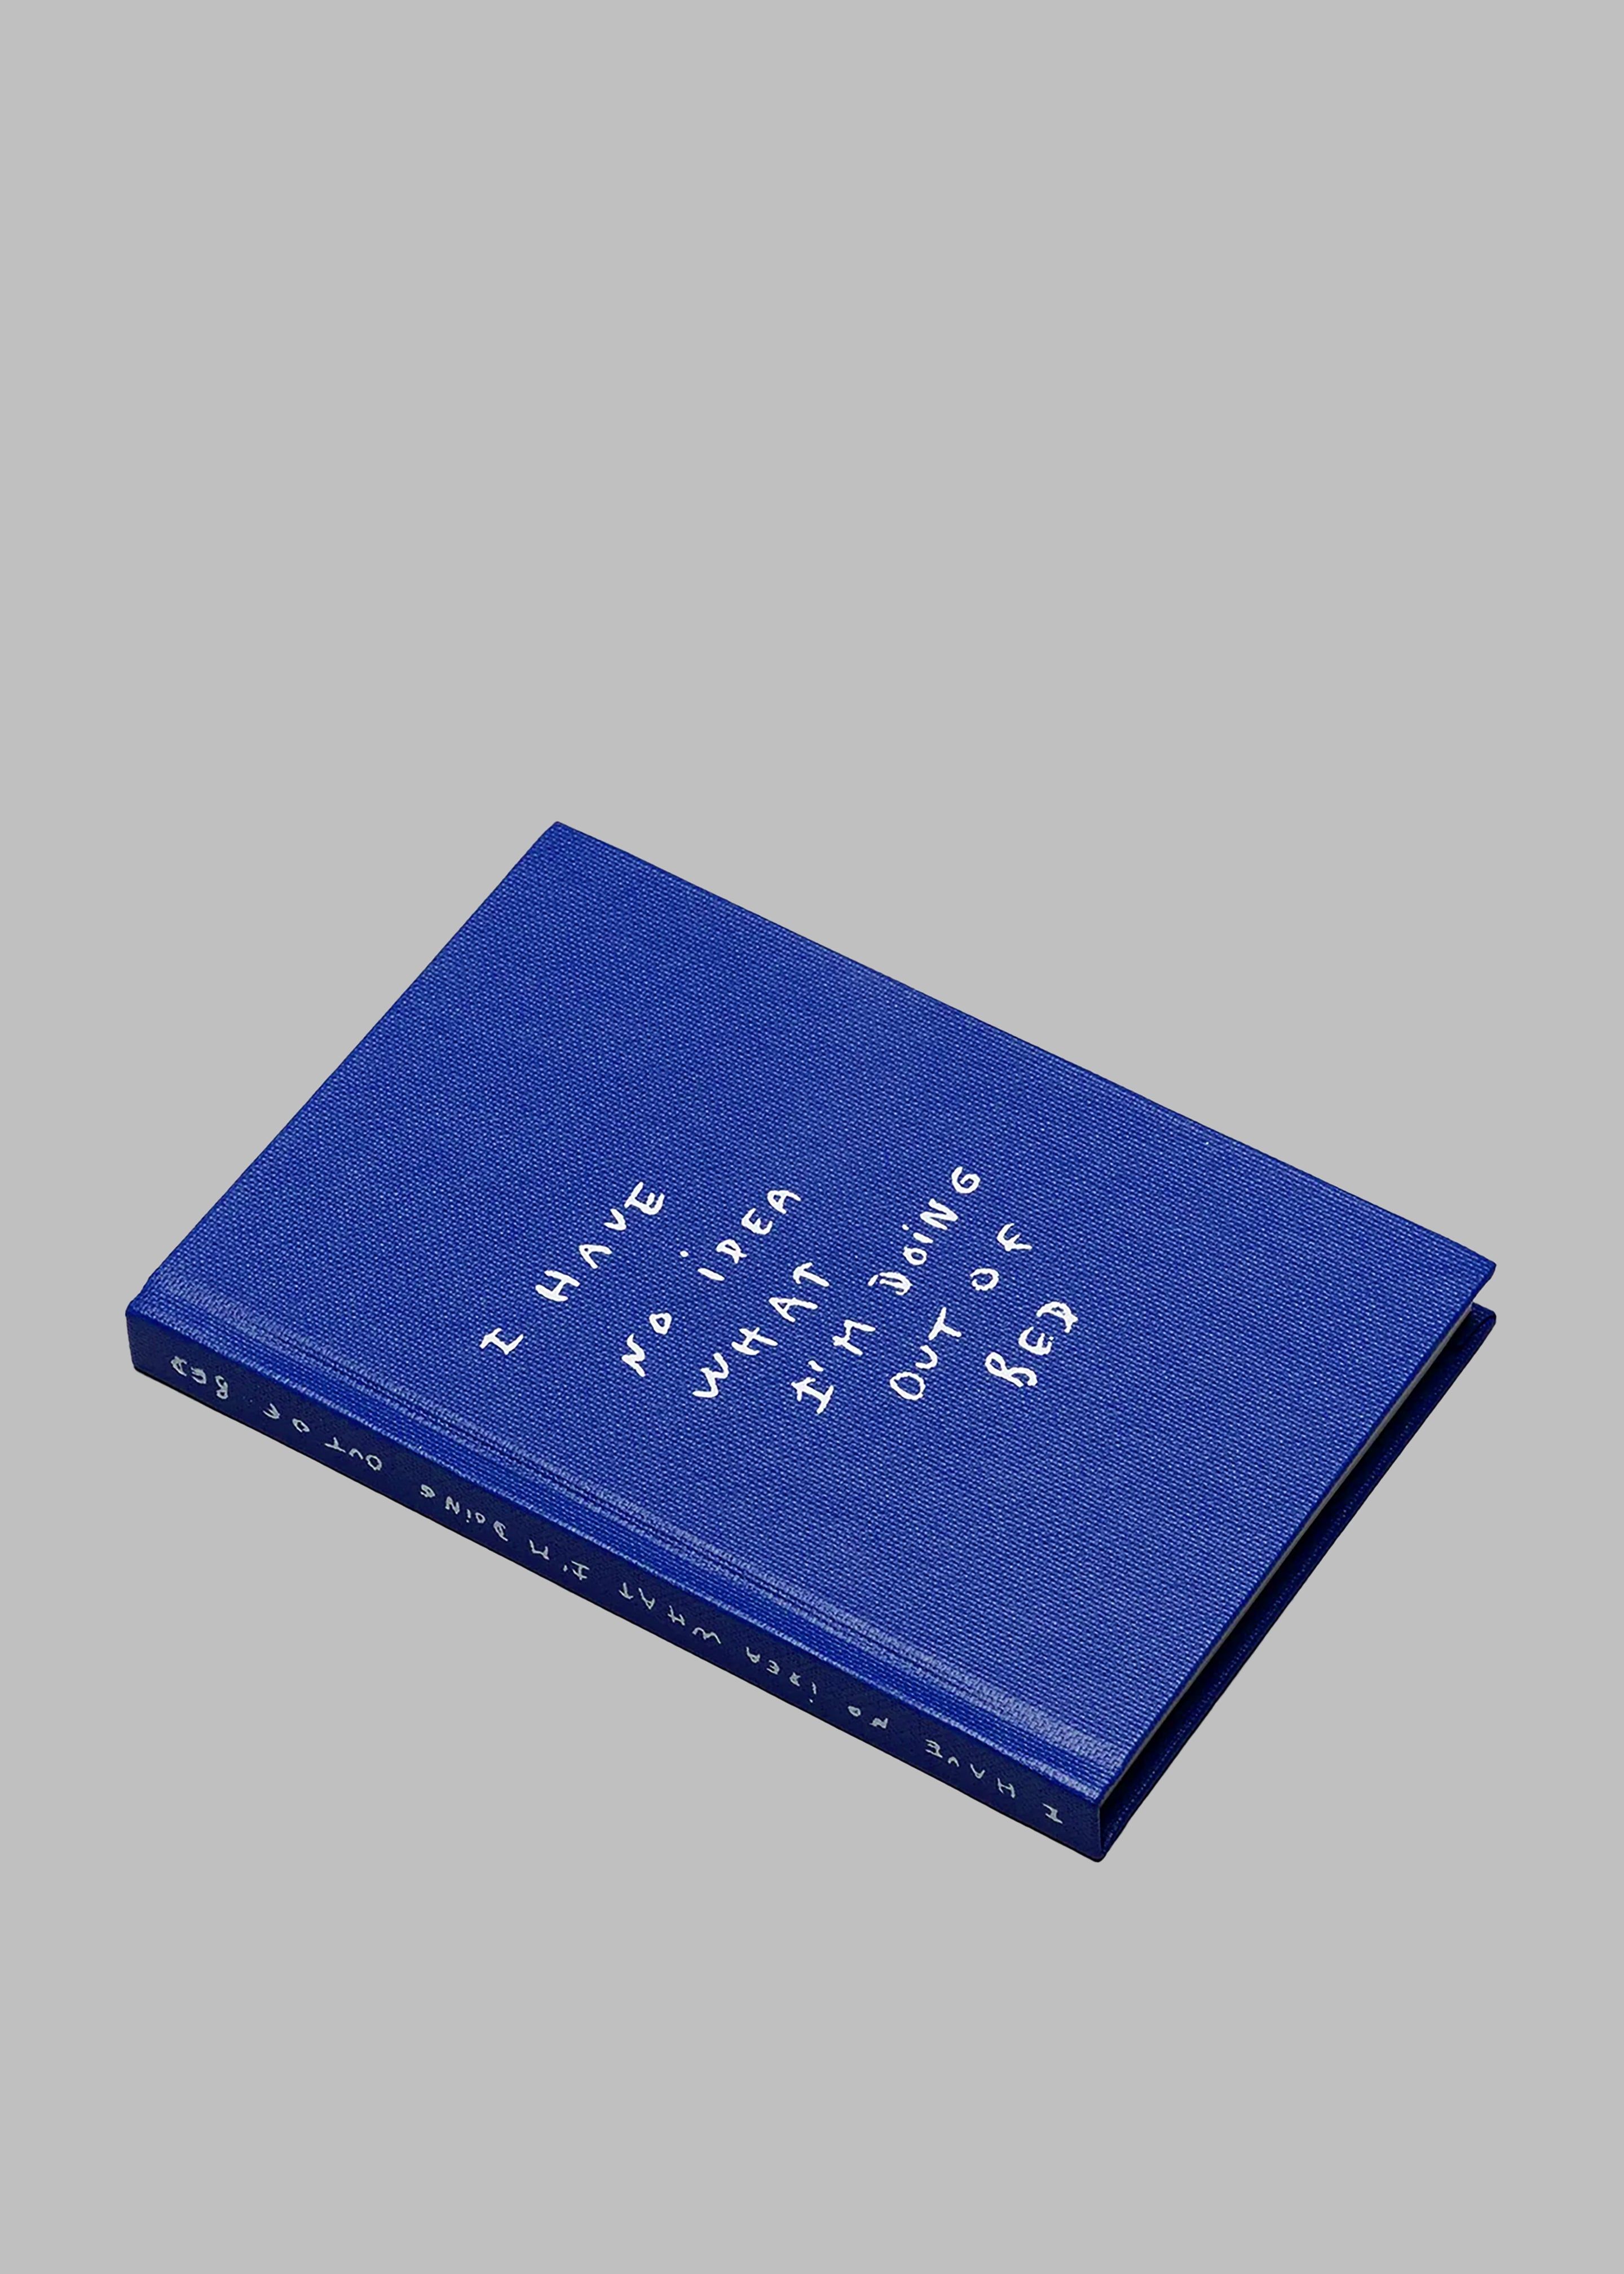 Thomas Lélu 'I Have No Idea What I'm Doing Out of Bed' Book - 3